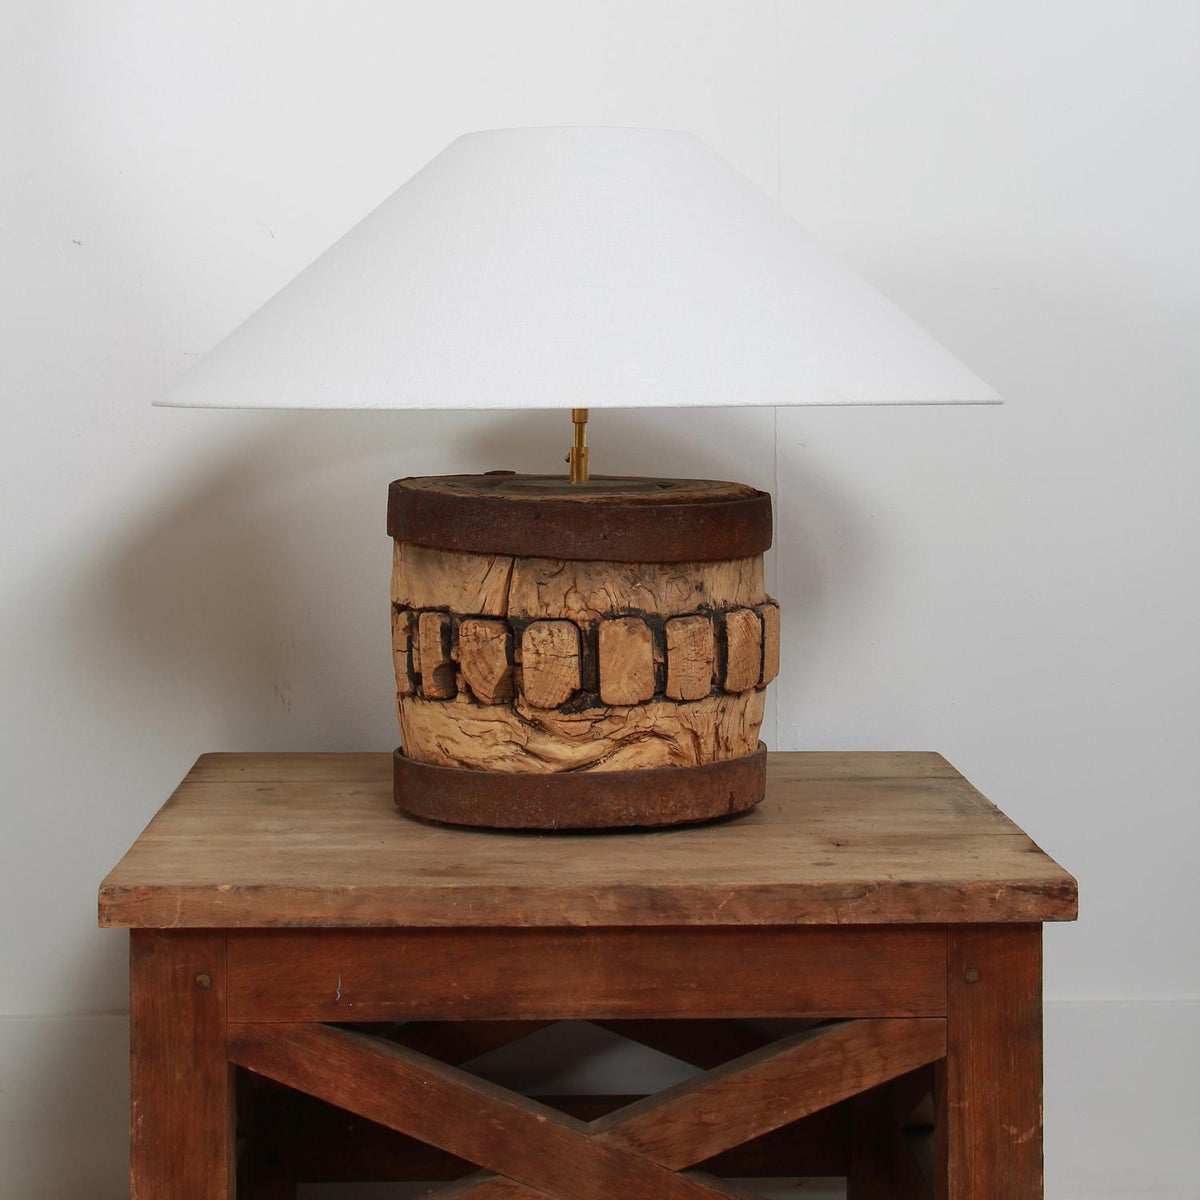 EXCEPTIONAL XL LAMP FASHIONED FROM AN ANTIQUE ARCHITECTURAL WOODEN FRAGMENT